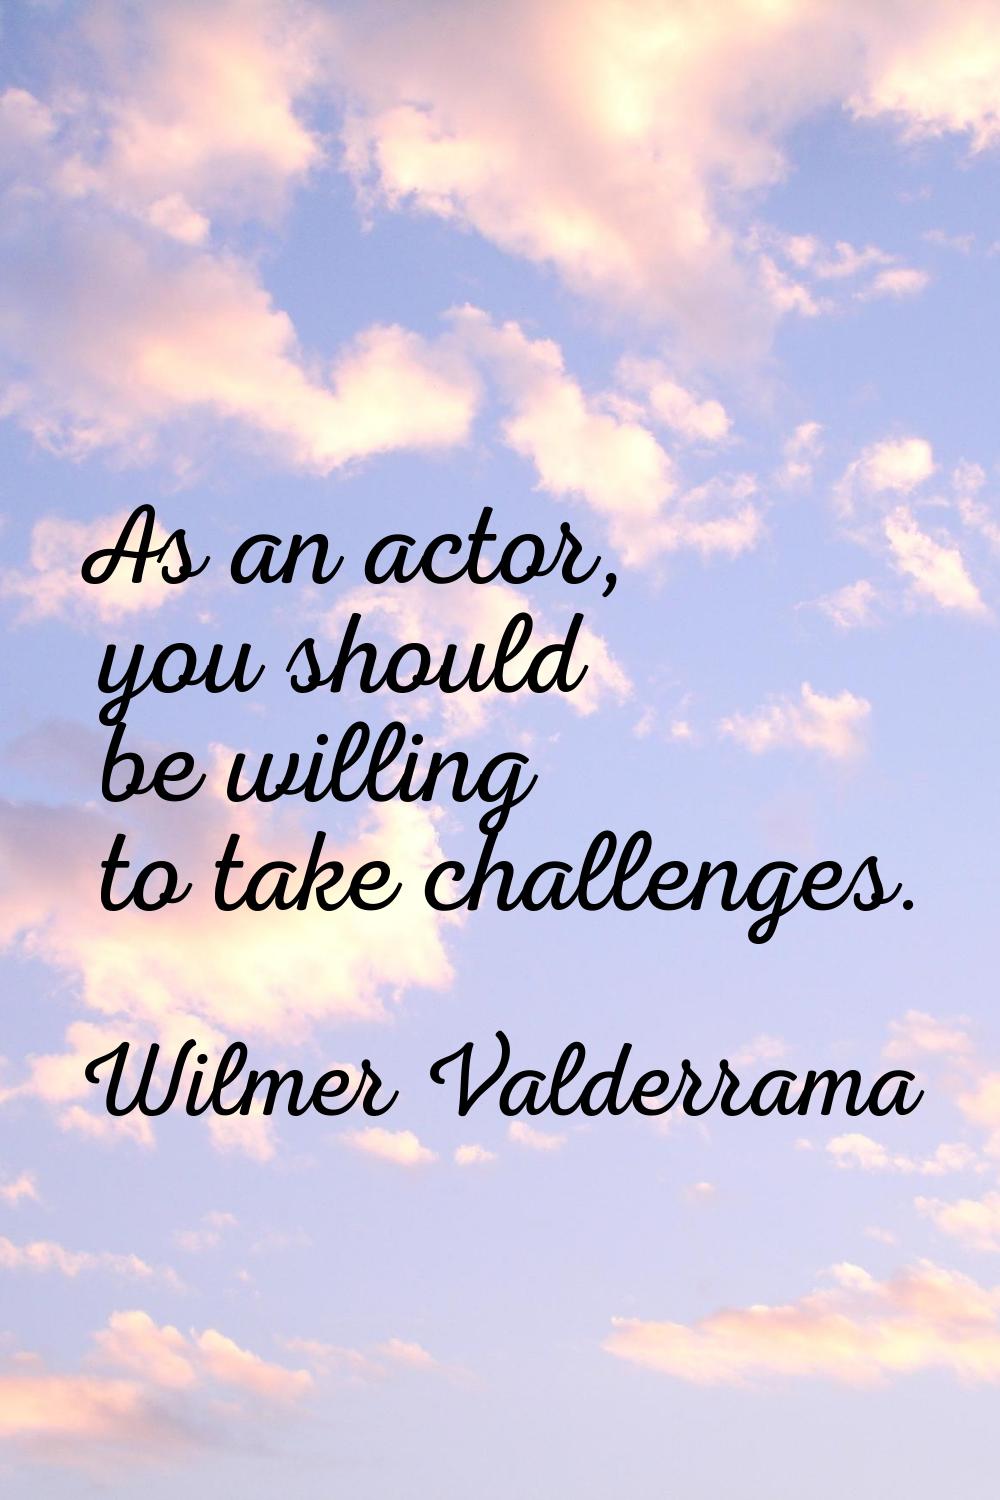 As an actor, you should be willing to take challenges.